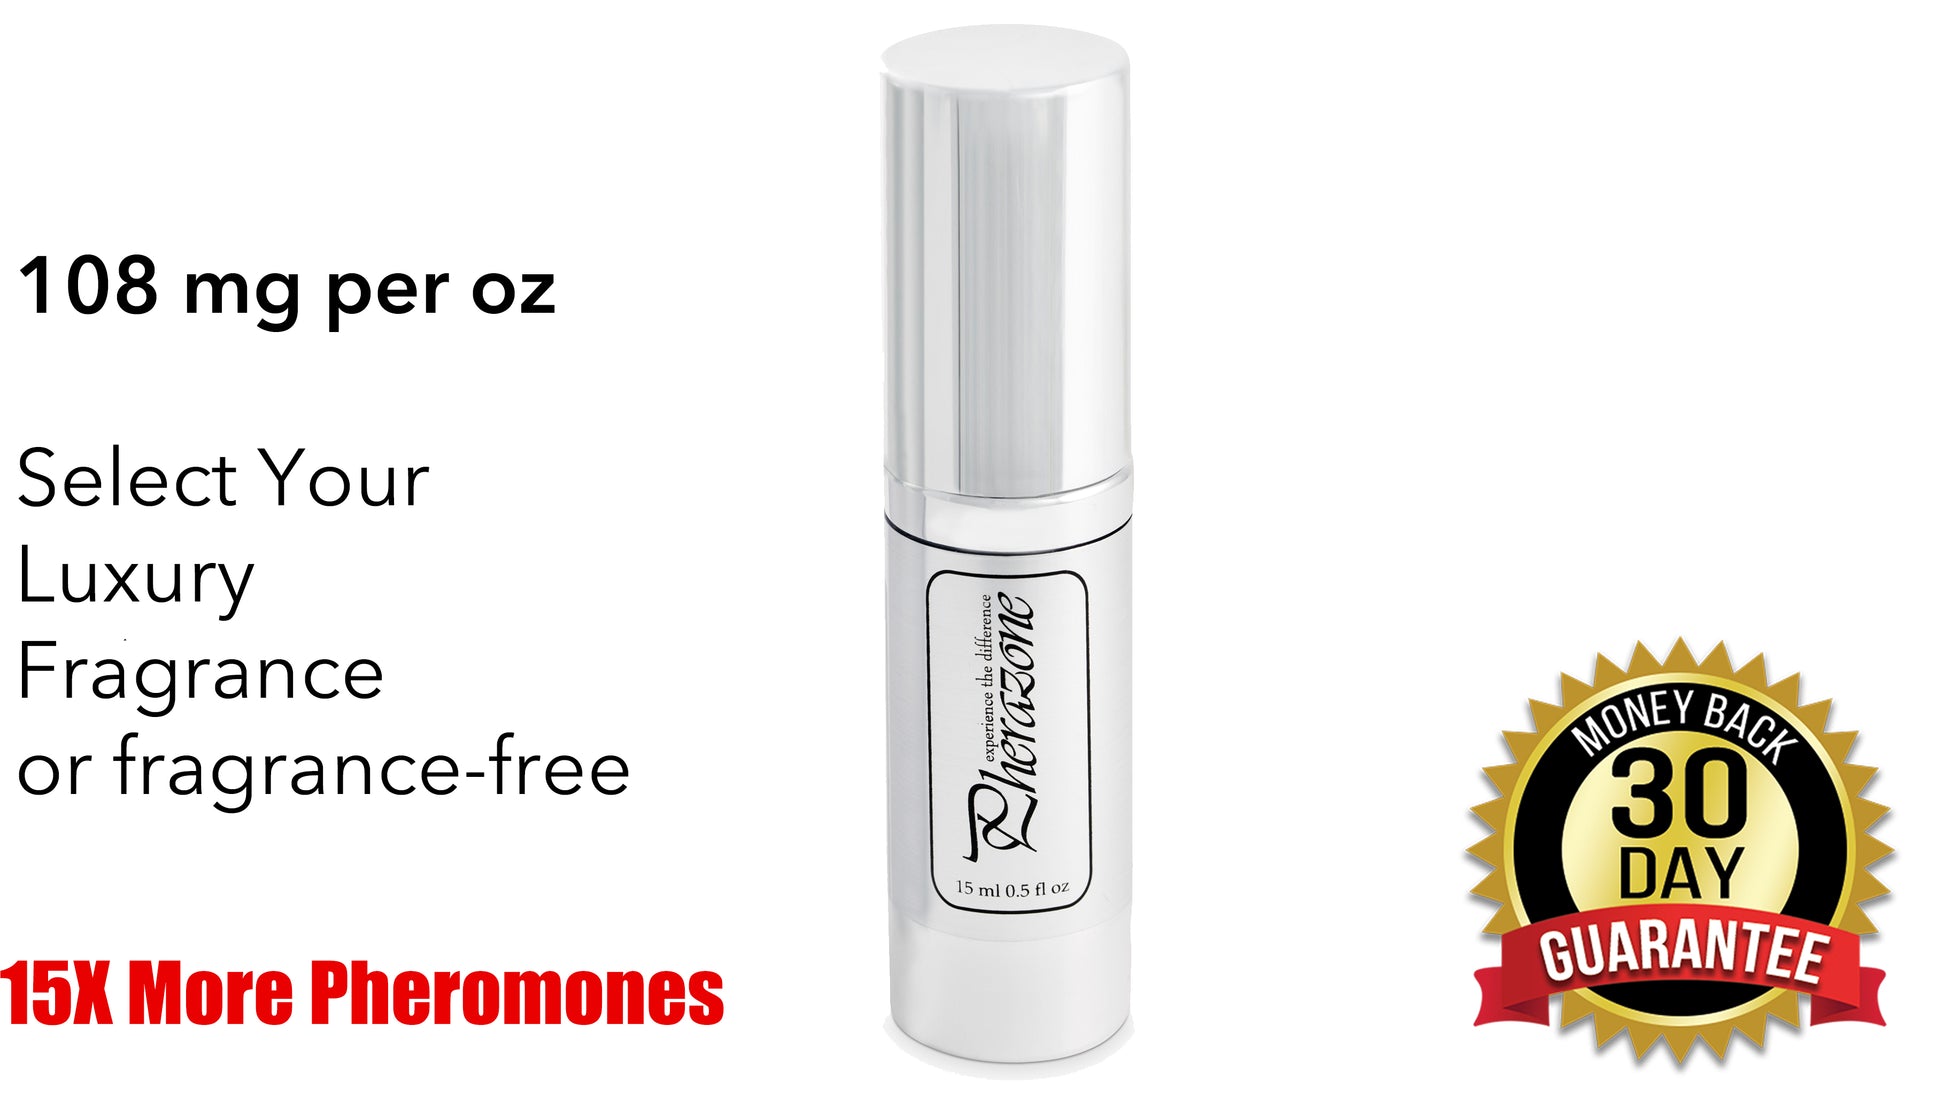 Pherazone - The most powerful pheromone cologne in the world